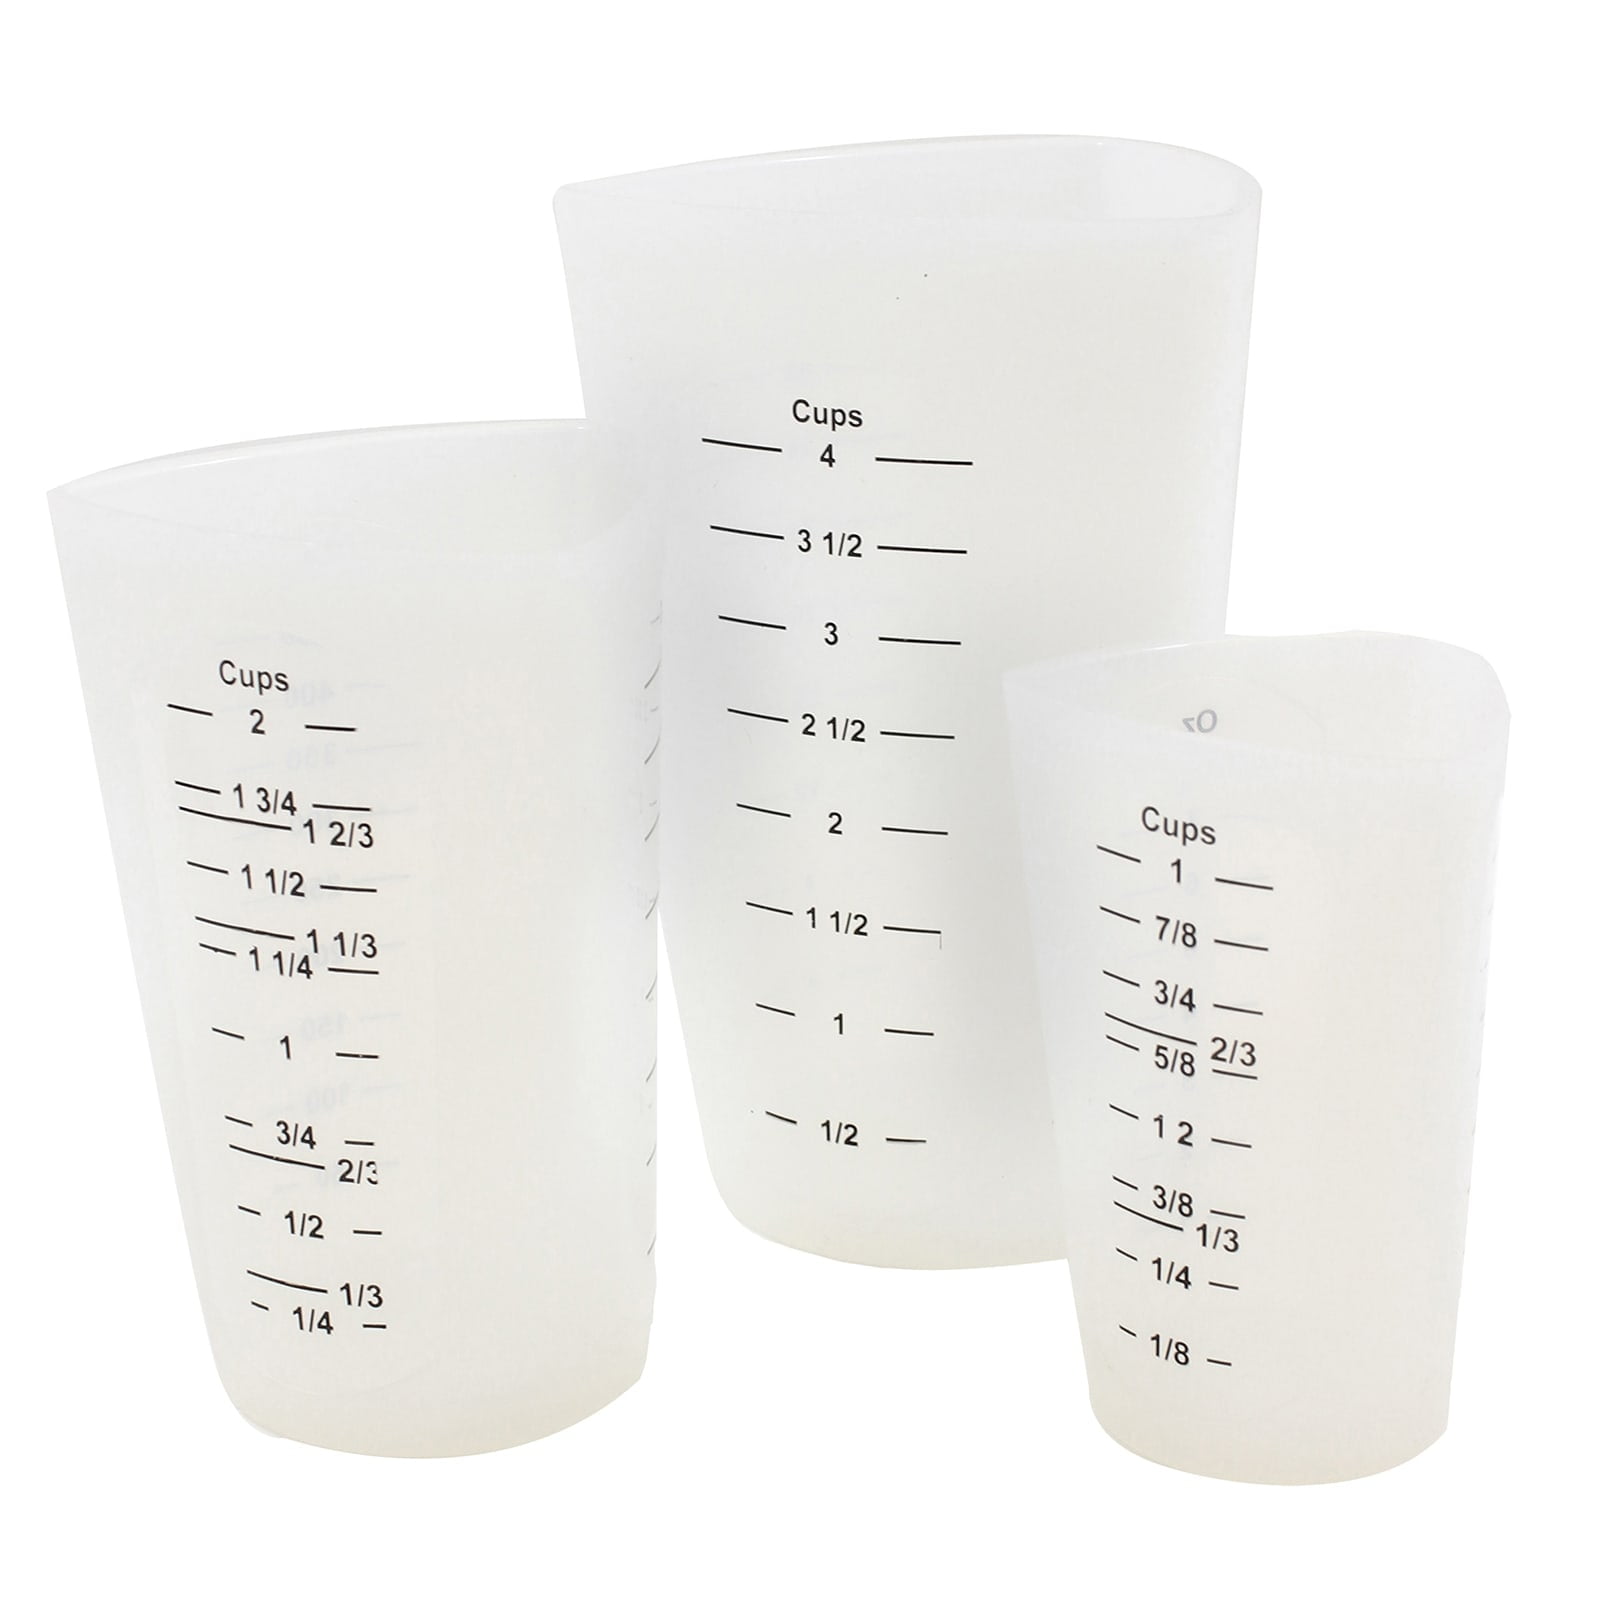 TableCraft HSMC3 3-Piece Stacking Silicone Measure Cup Set